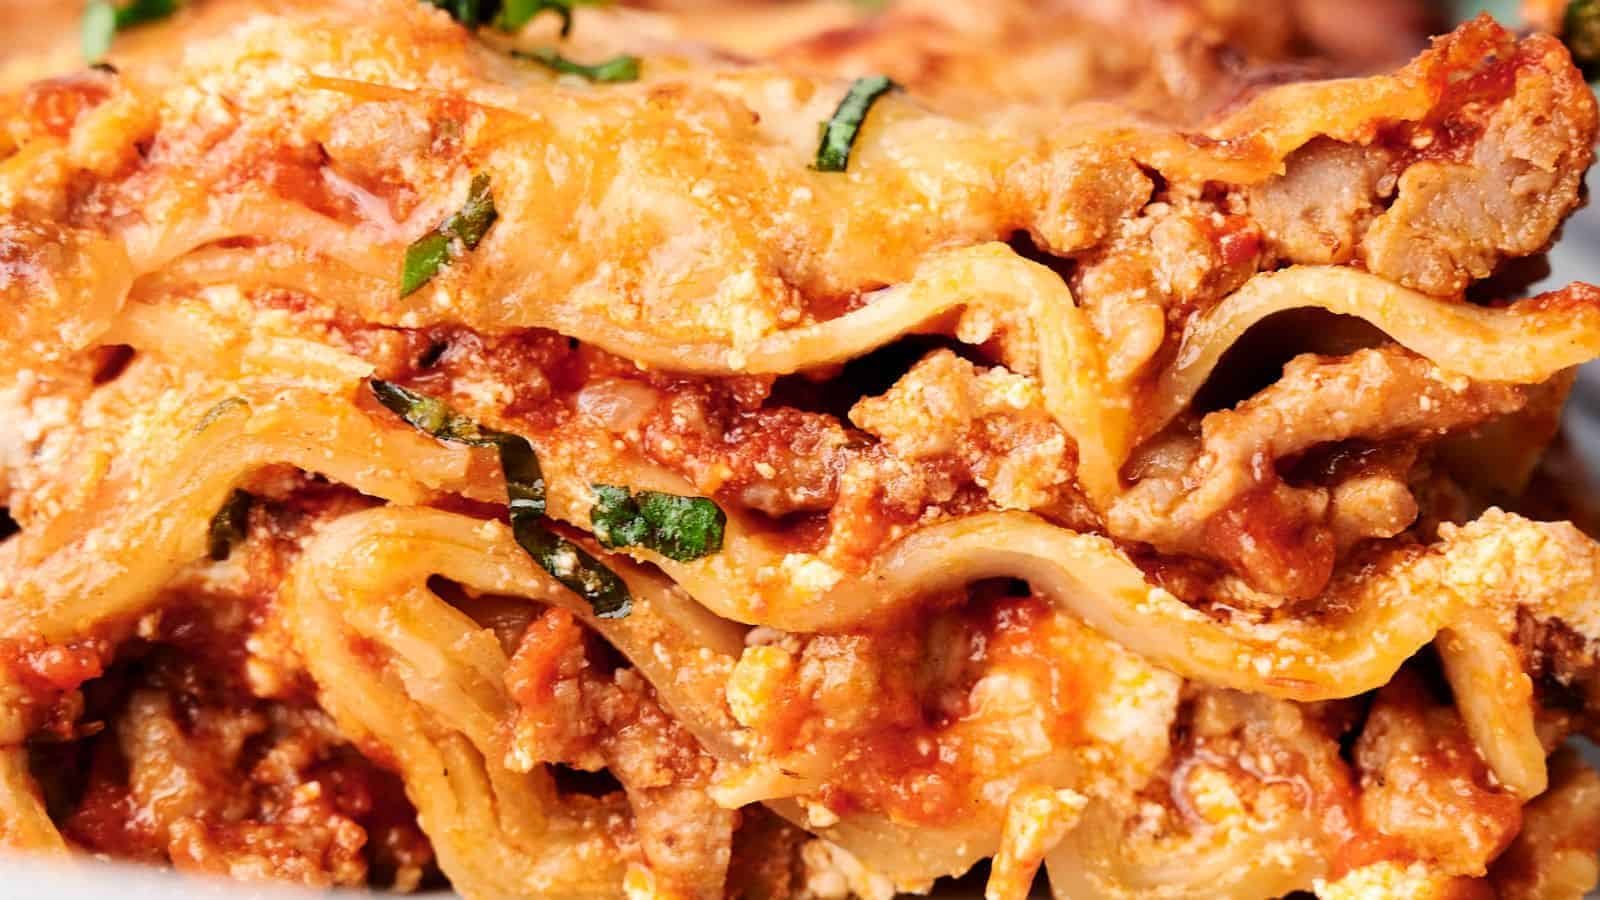 Close-up of a delicious slice of lasagna, showcasing layers of pasta, ground meat, tomato sauce, ricotta cheese, and garnished with chopped basil.